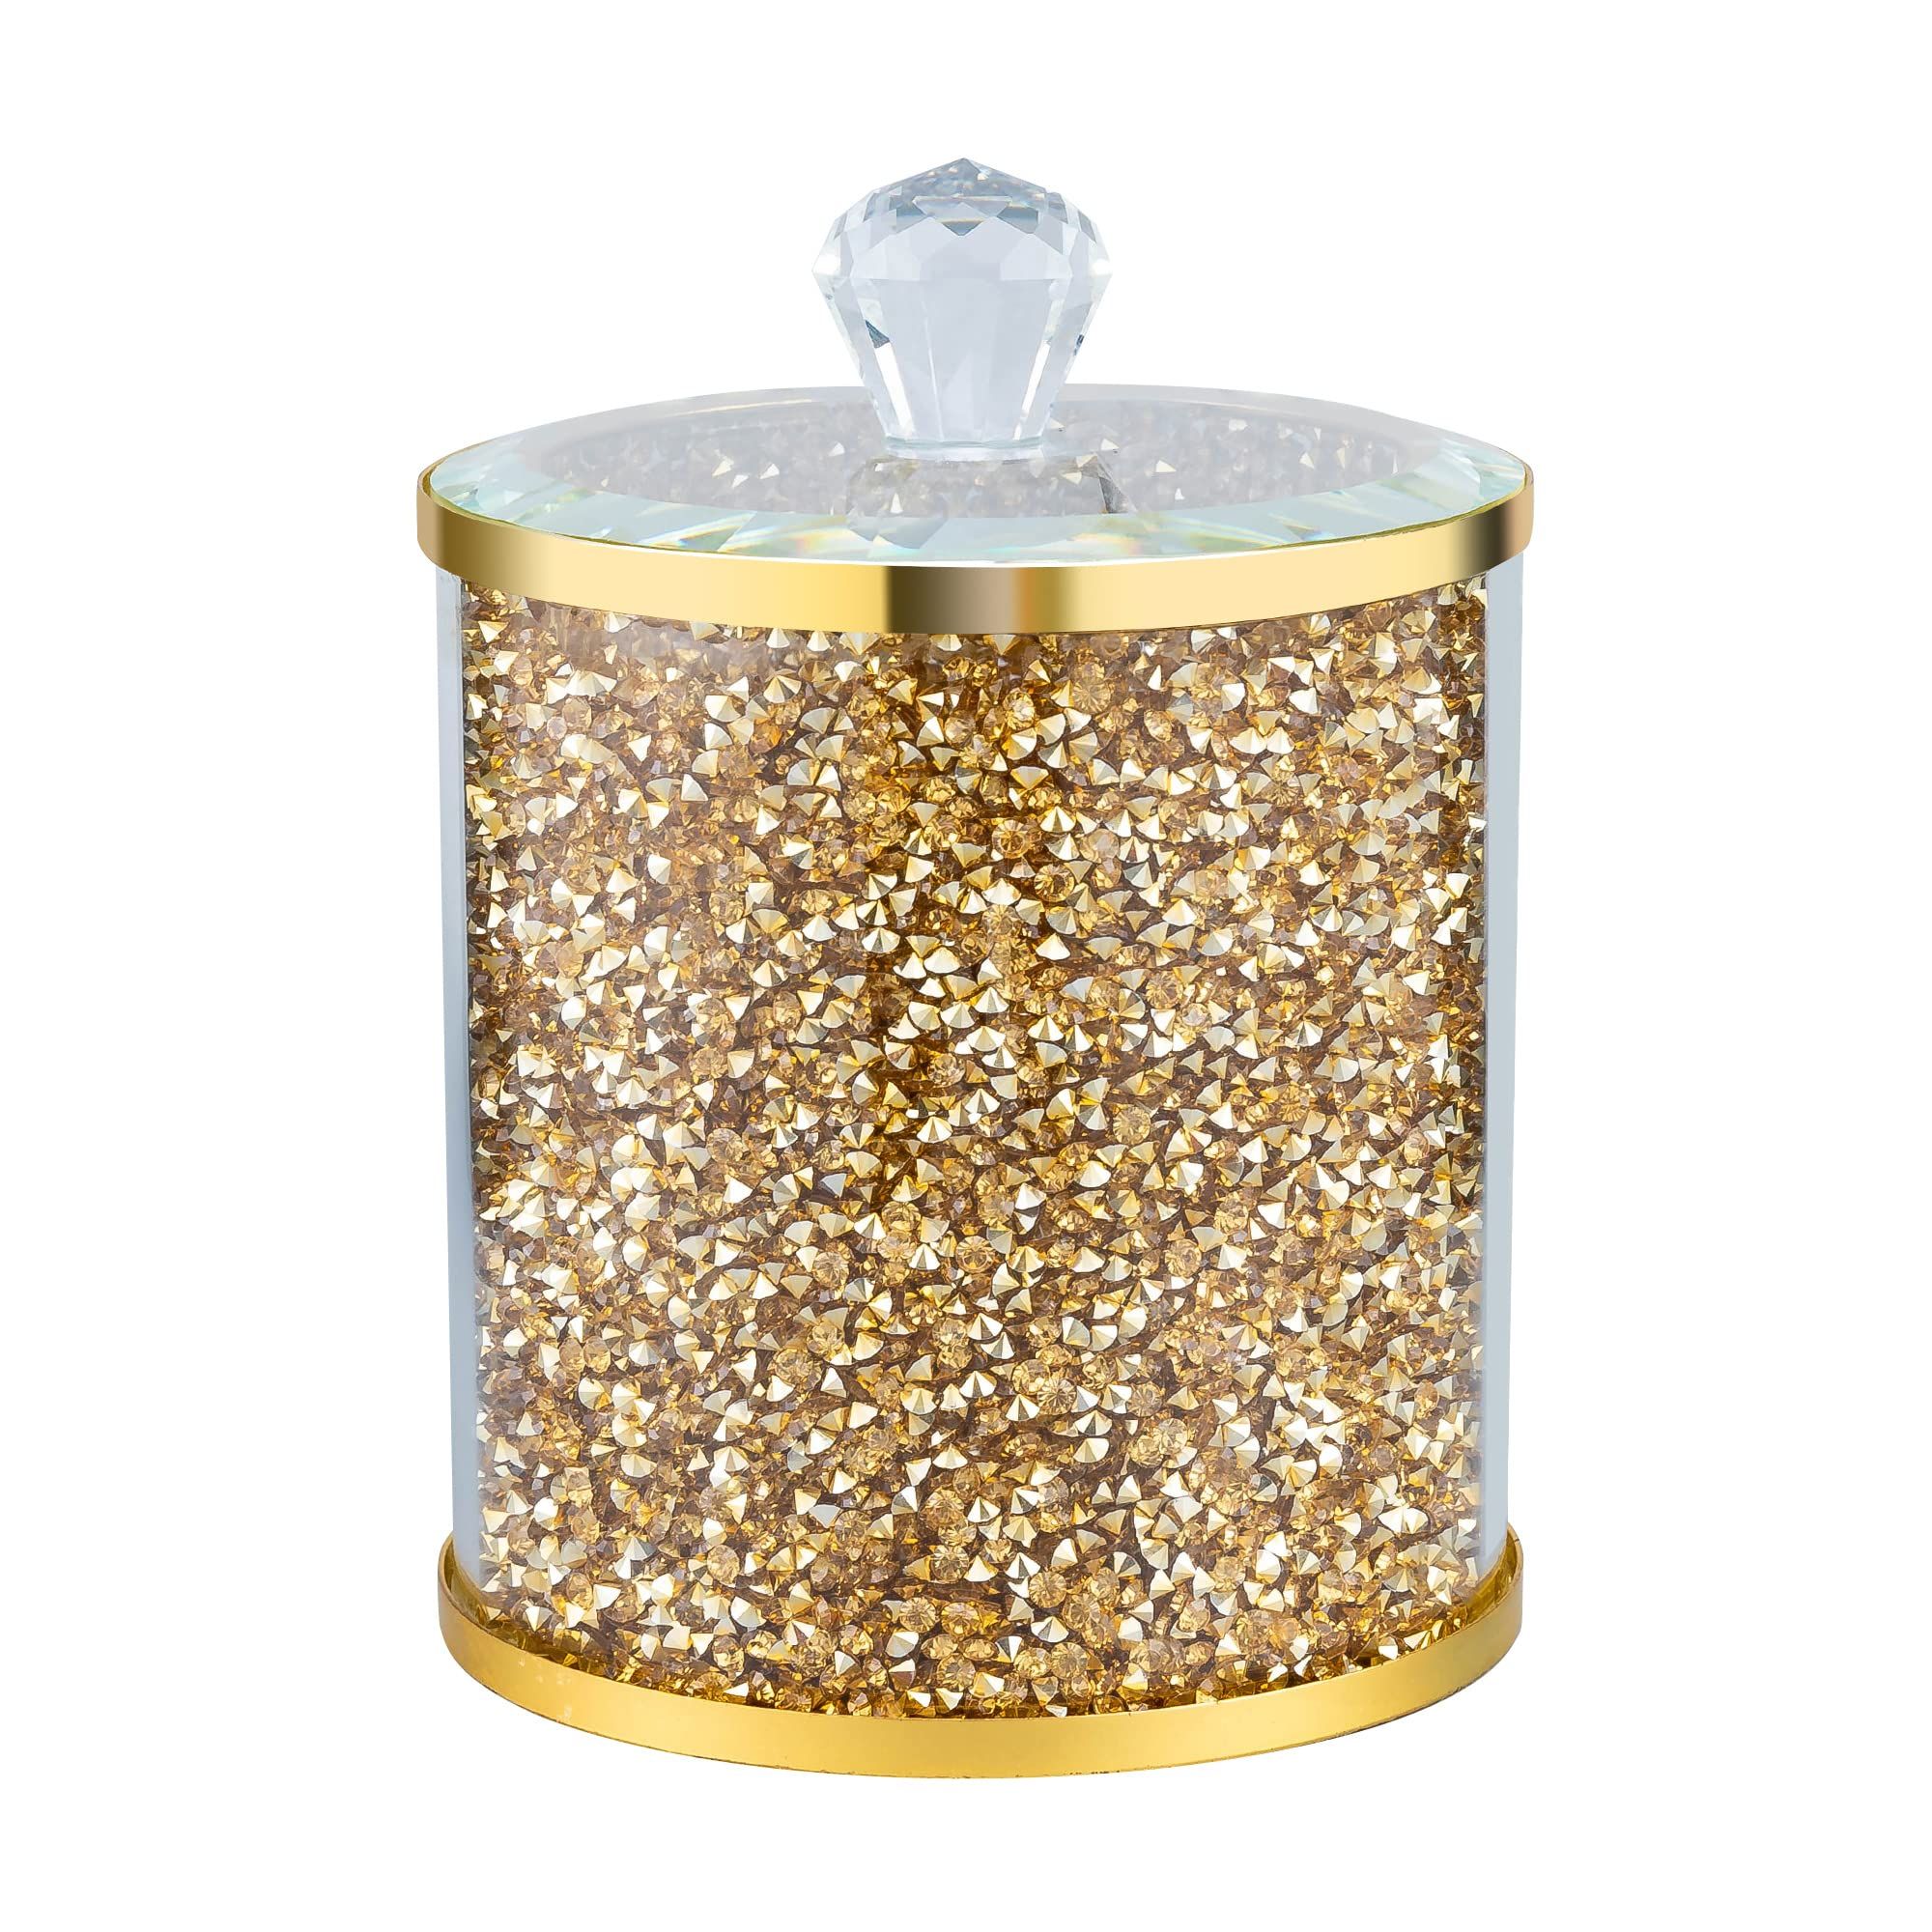 Hochance Glass Storage Containers Jars Set for Coffee Tea Sugar,Bling Bling Glam Crystal Diamonds Mo | Amazon (US)